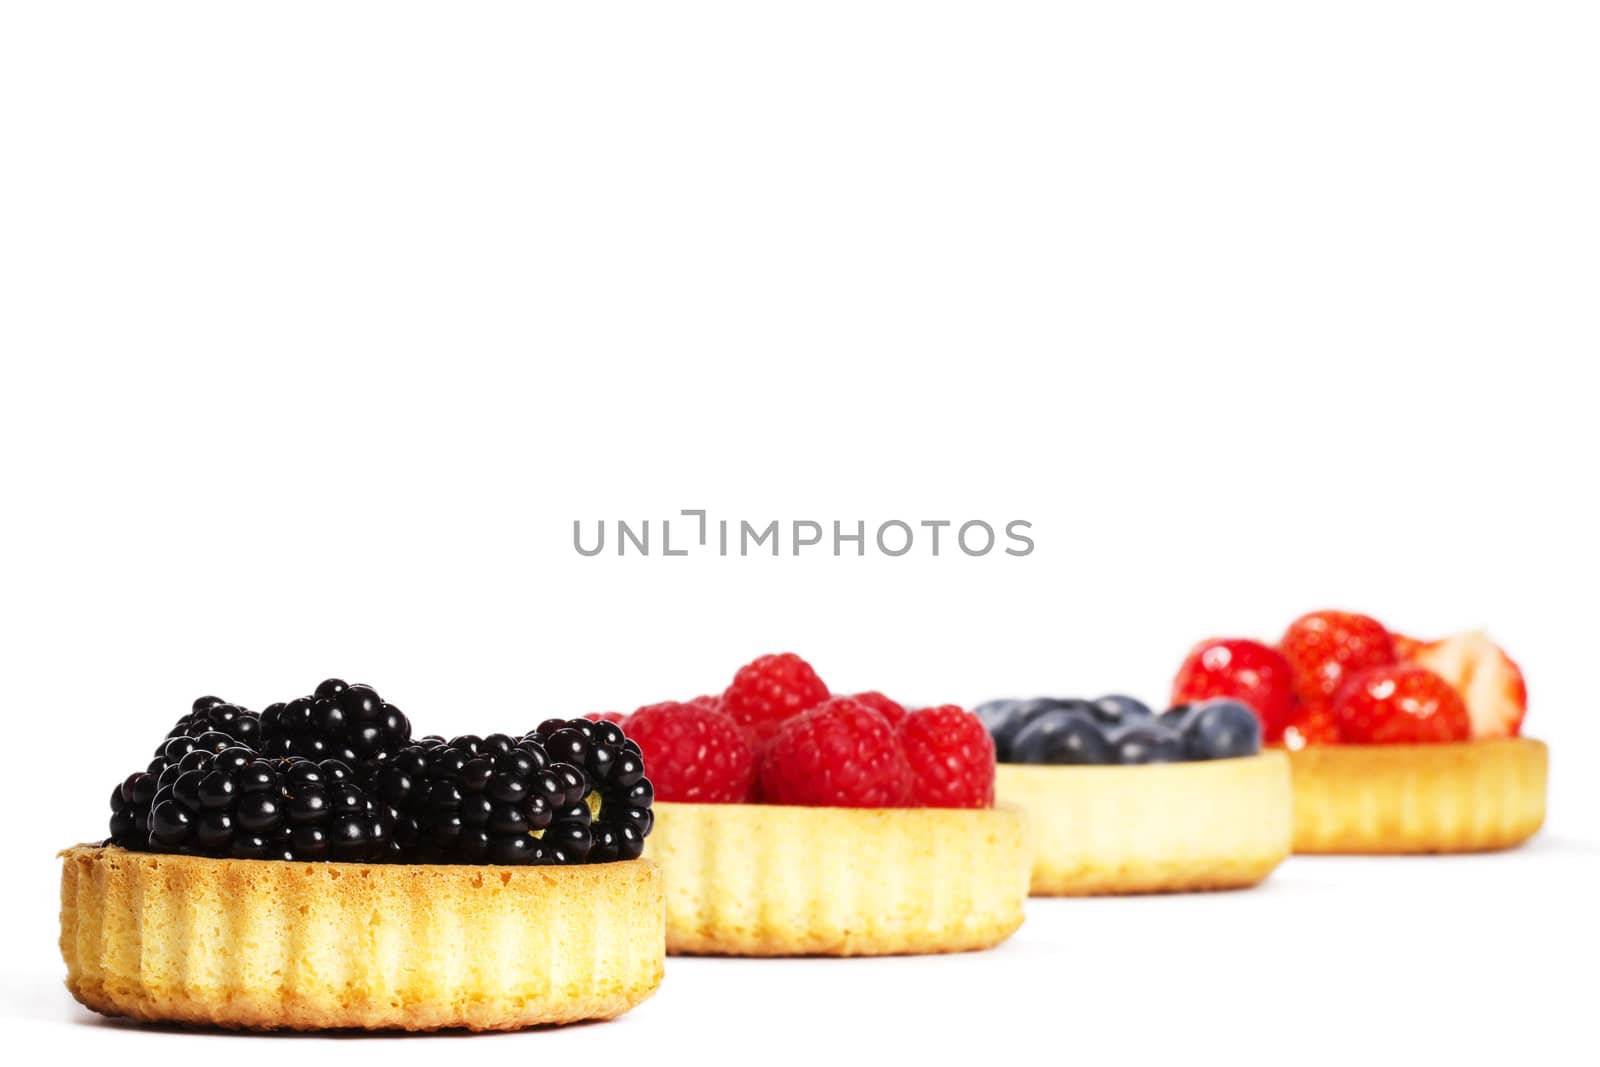 blackberries and other berries in tartlet cakes by RobStark